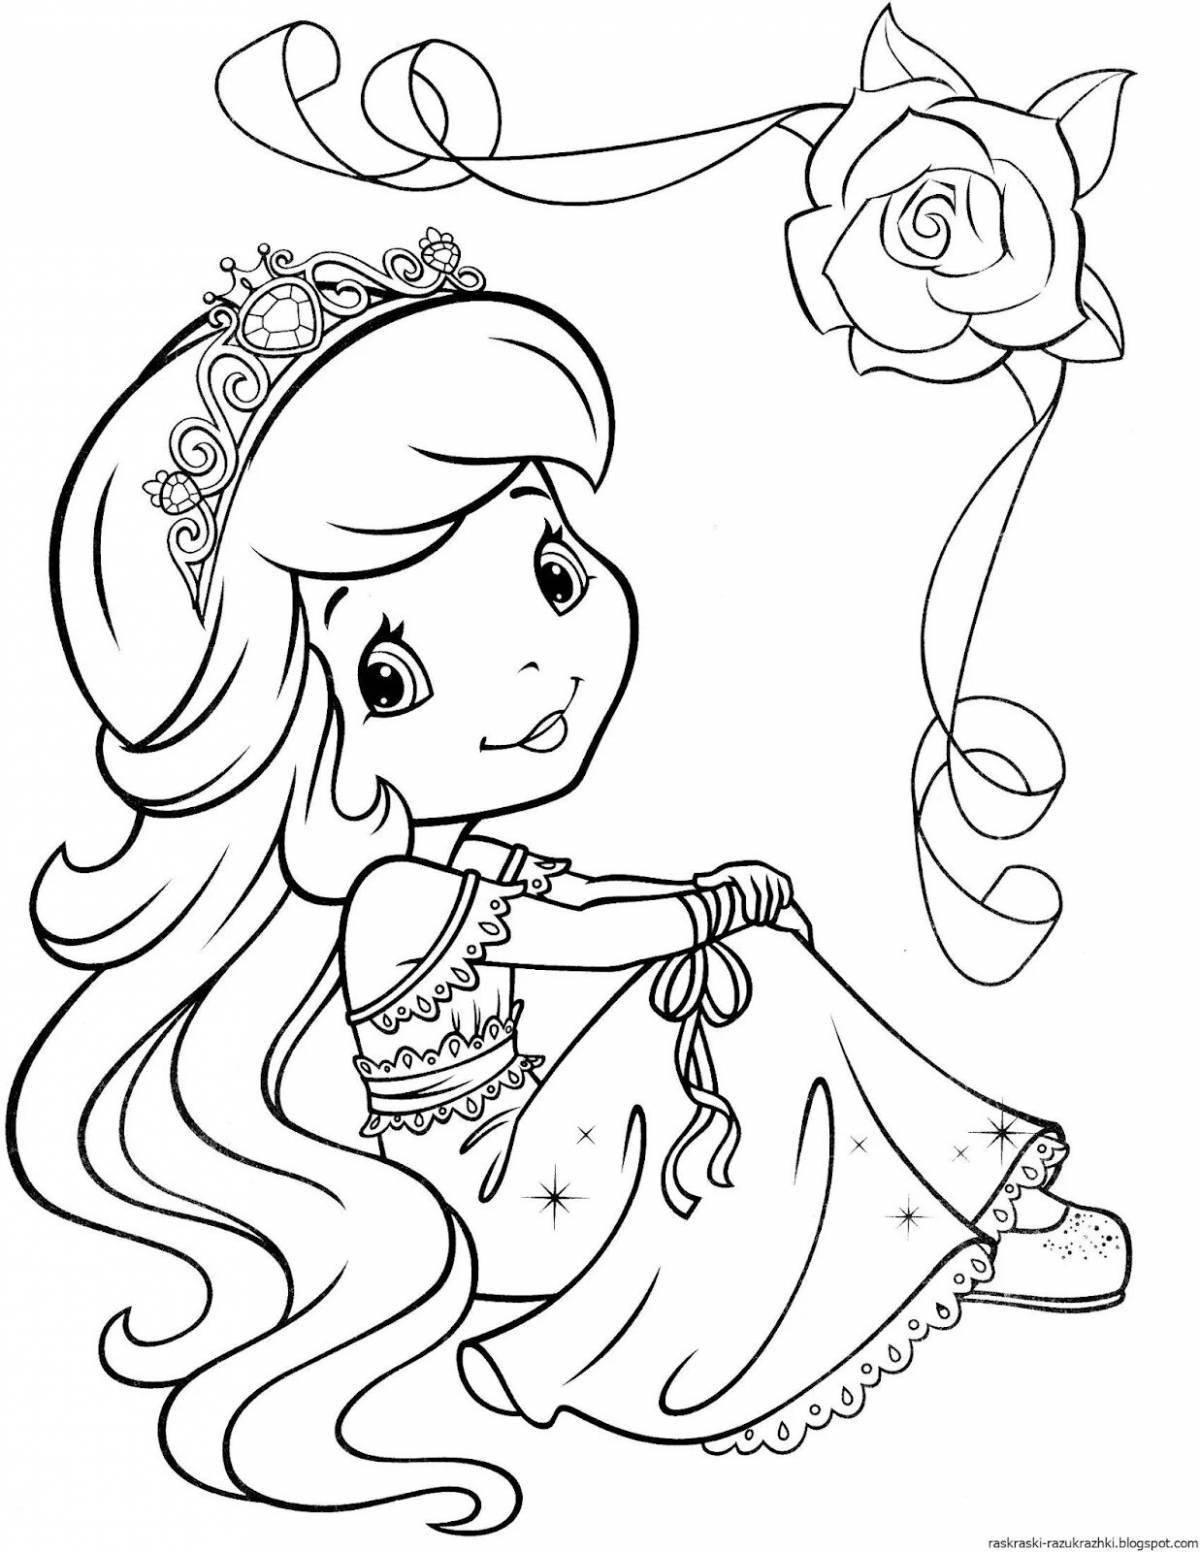 Charming coloring beautiful for girls 5 years old